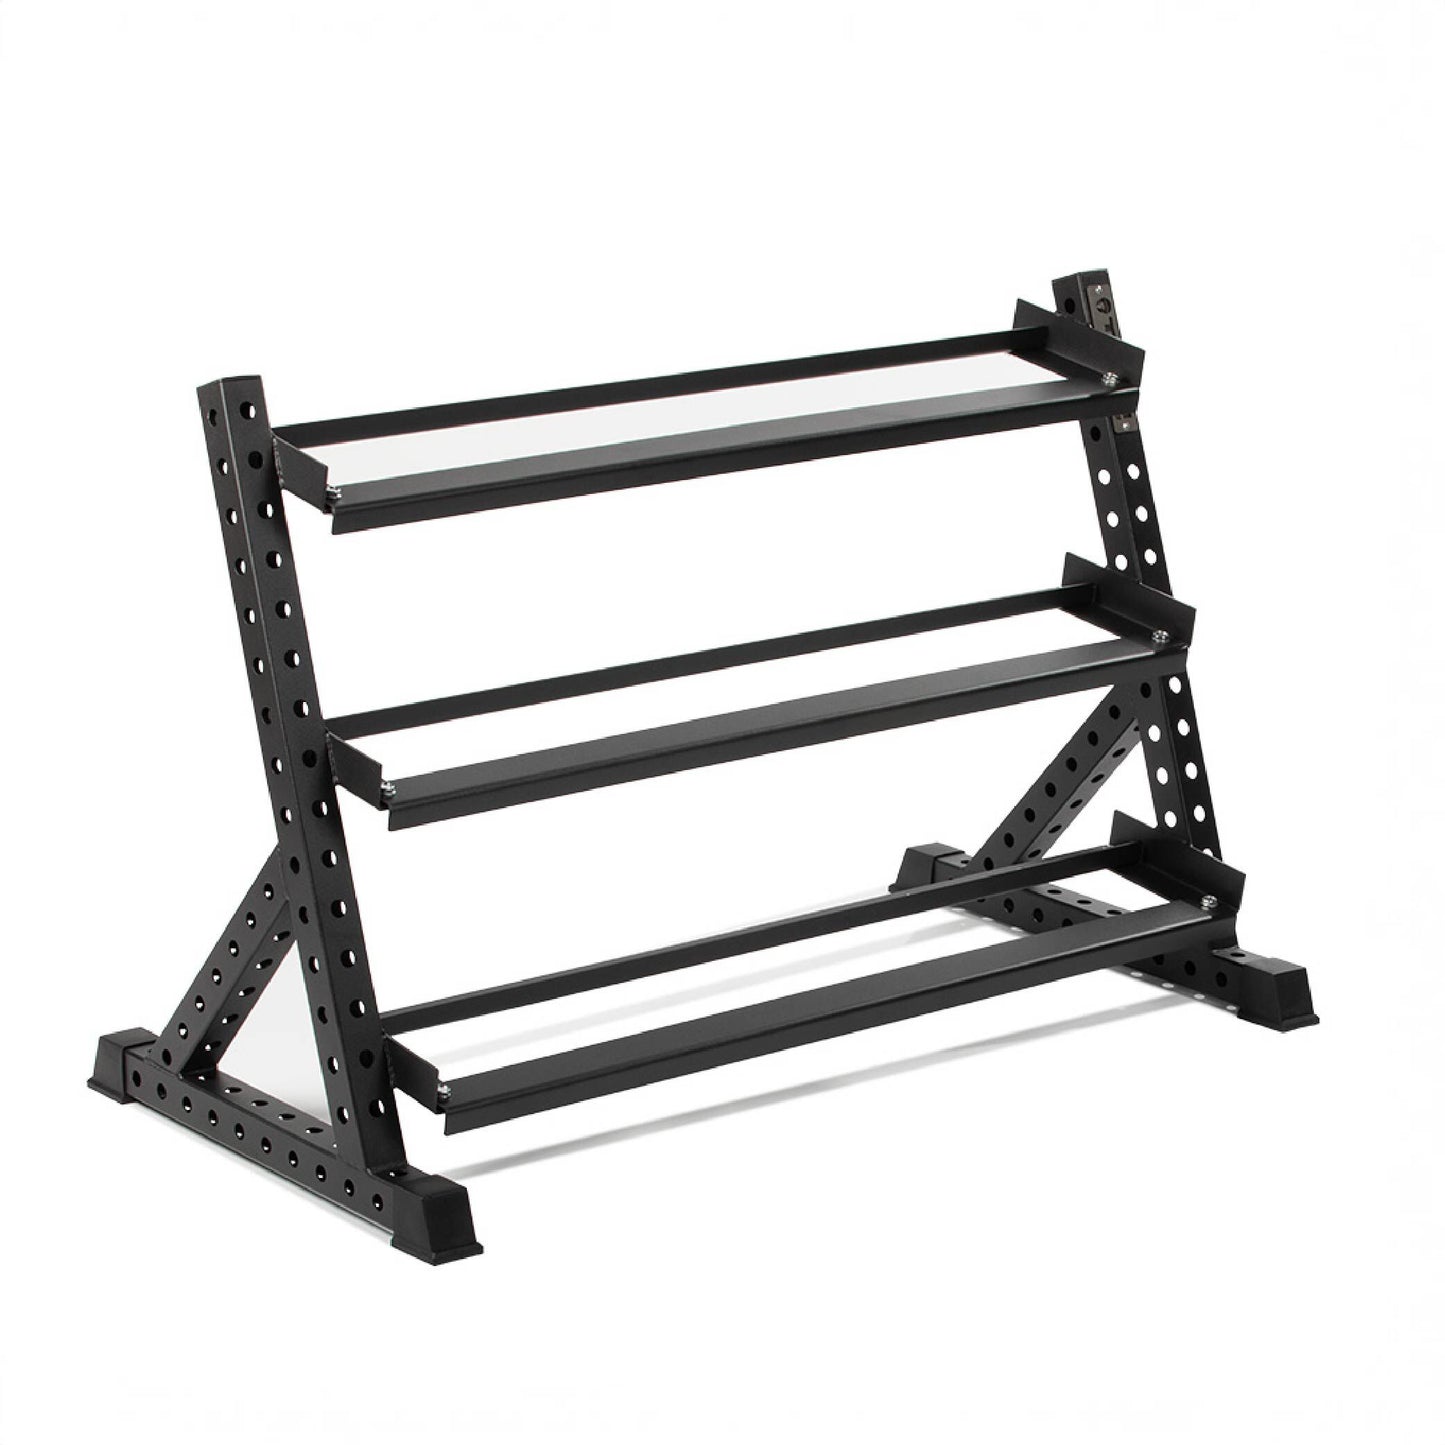 3-Tier Dumbbell Weight Rack - view 1